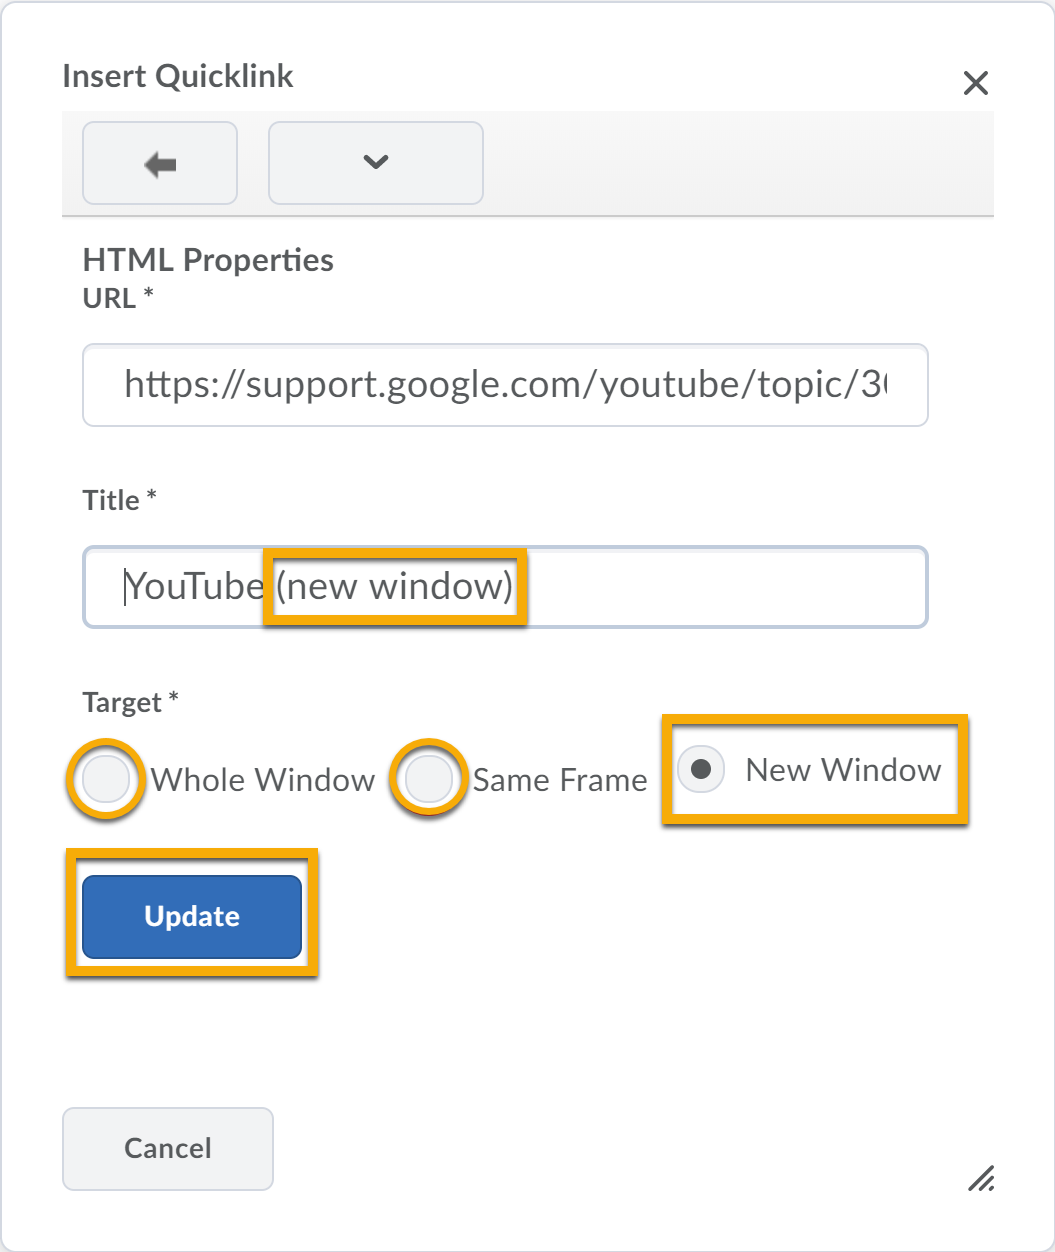 Quicklink information populated in URL and Title. Radio buttons for Whole Window, Same Frame and New Window highlighted. Choosing New Window in this example with Update button highlighted.